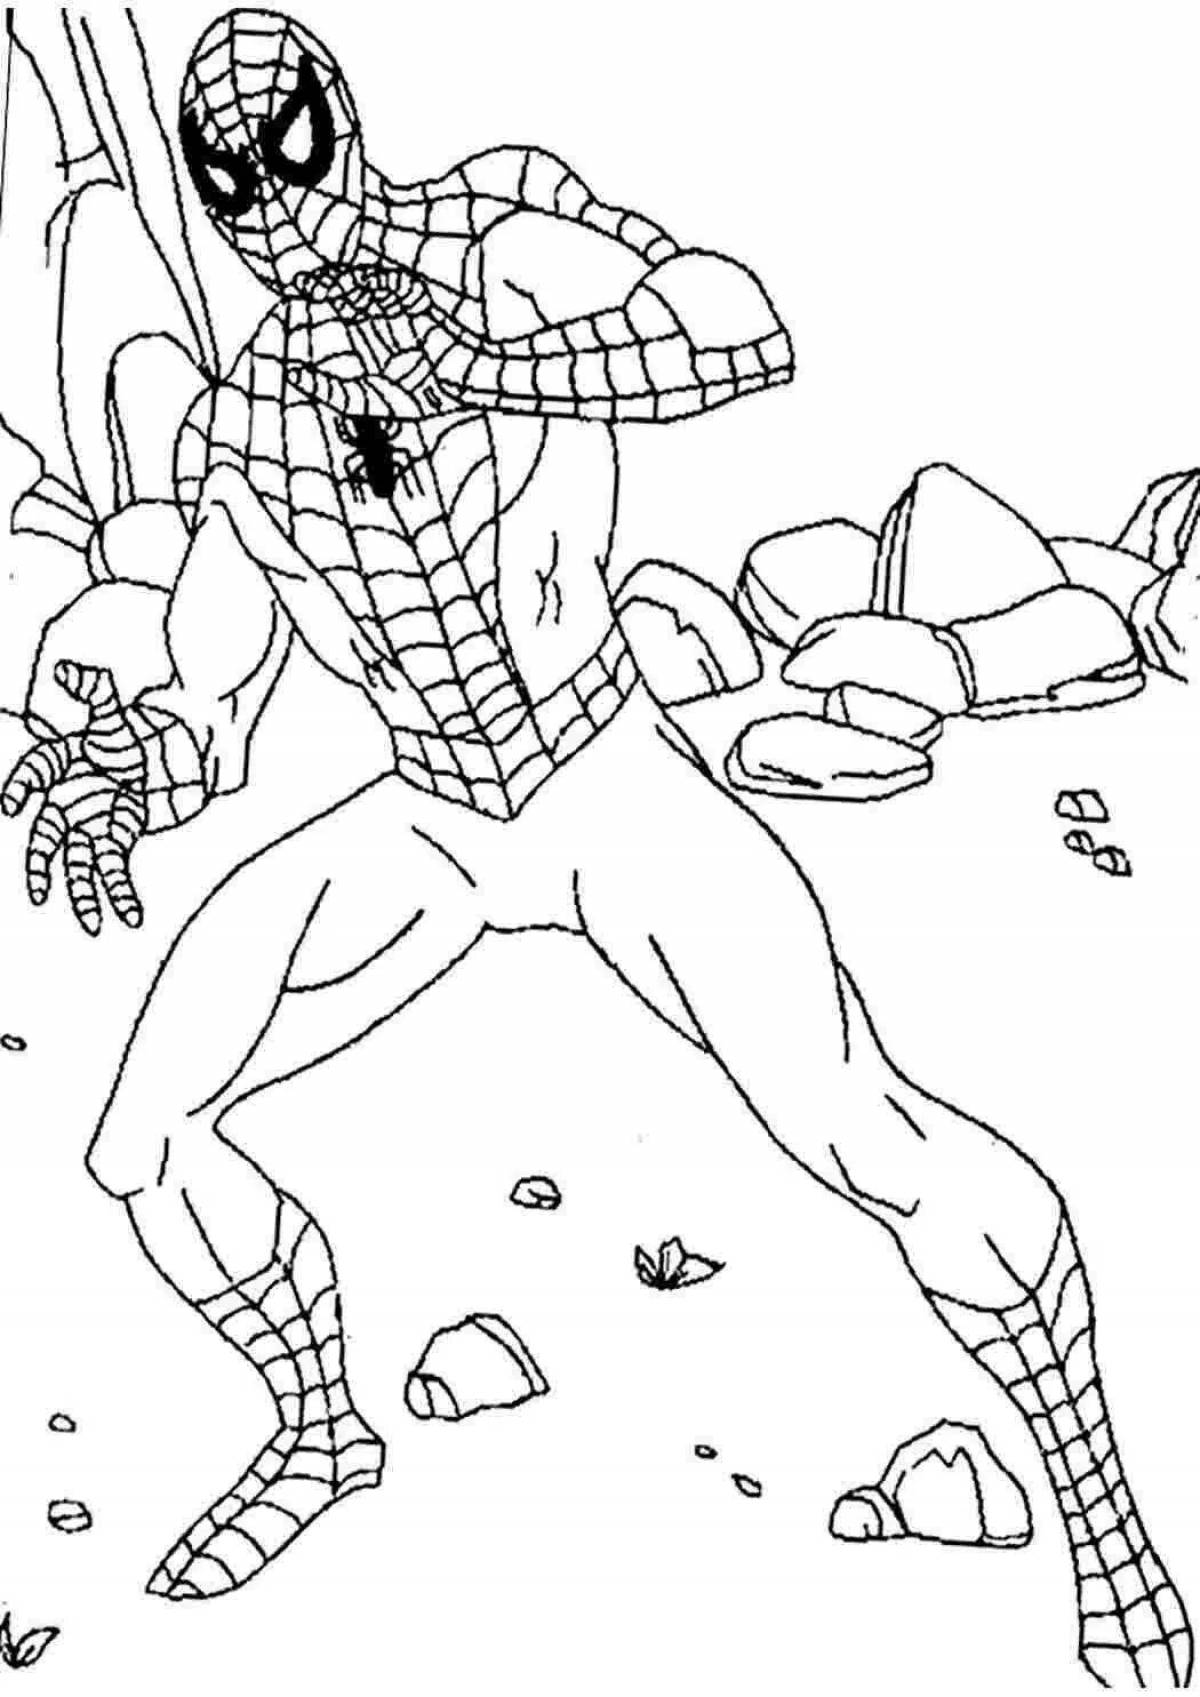 Gorgeous superheroes coloring pages for 6-7 year olds